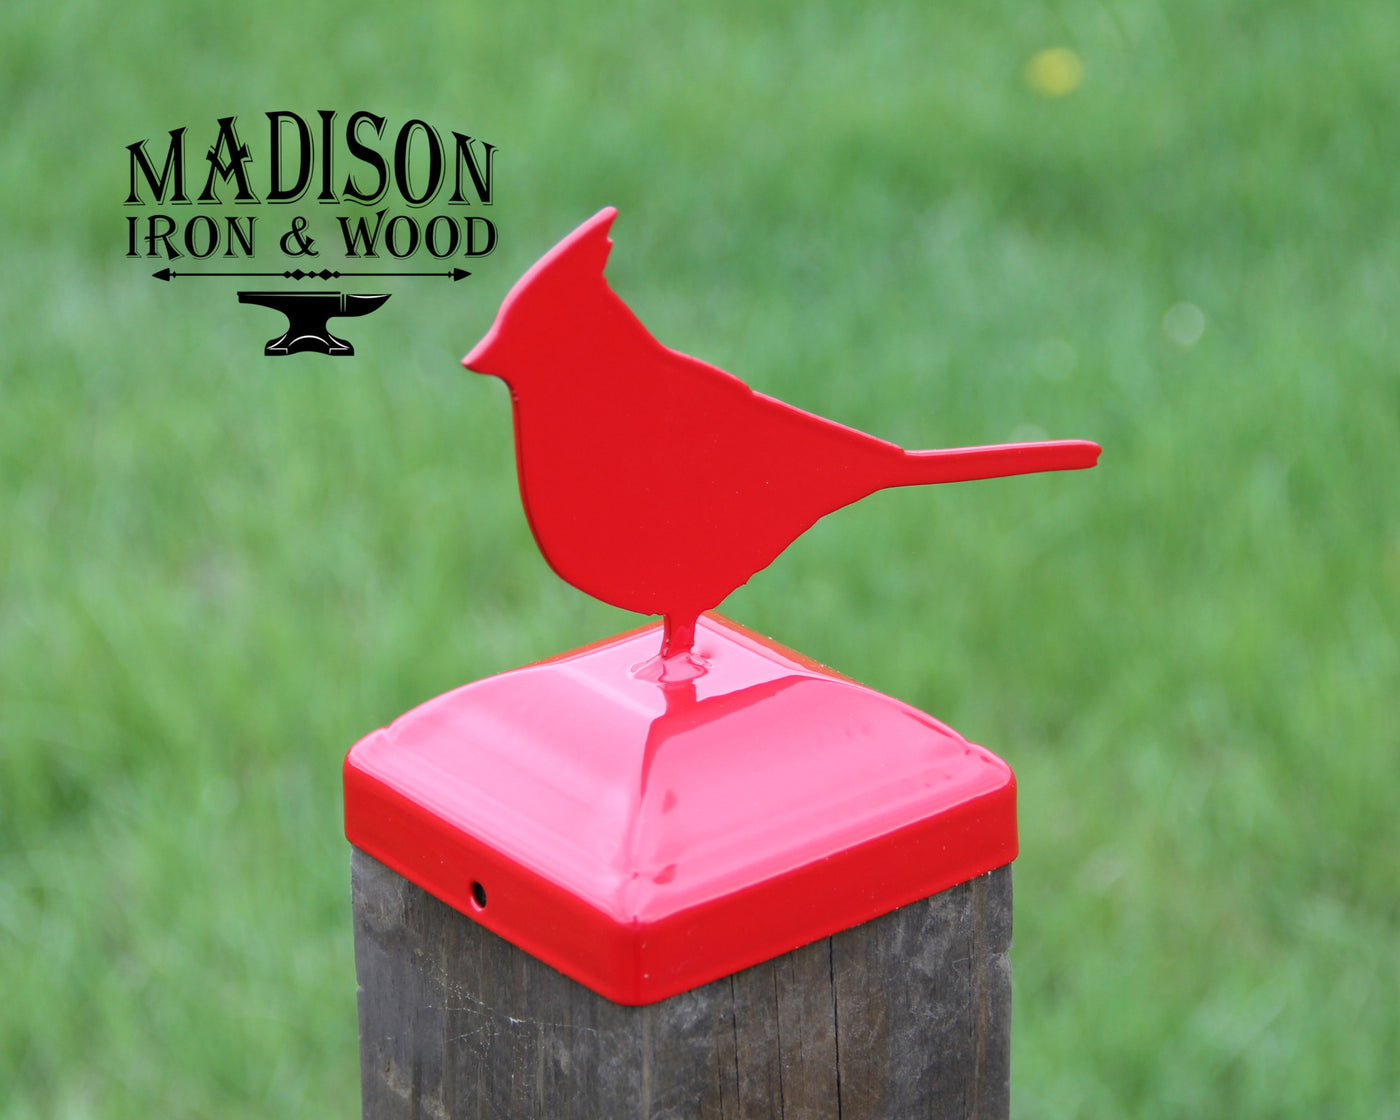 4X4 Cardinal Post Cap - Madison Iron and Wood - Post Cap - metal outdoor decor - Steel deocrations - american made products - veteran owned business products - fencing decorations - fencing supplies - custom wall decorations - personalized wall signs - steel - decorative post caps - steel post caps - metal post caps - brackets - structural brackets - home improvement - easter - easter decorations - easter gift - easter yard decor